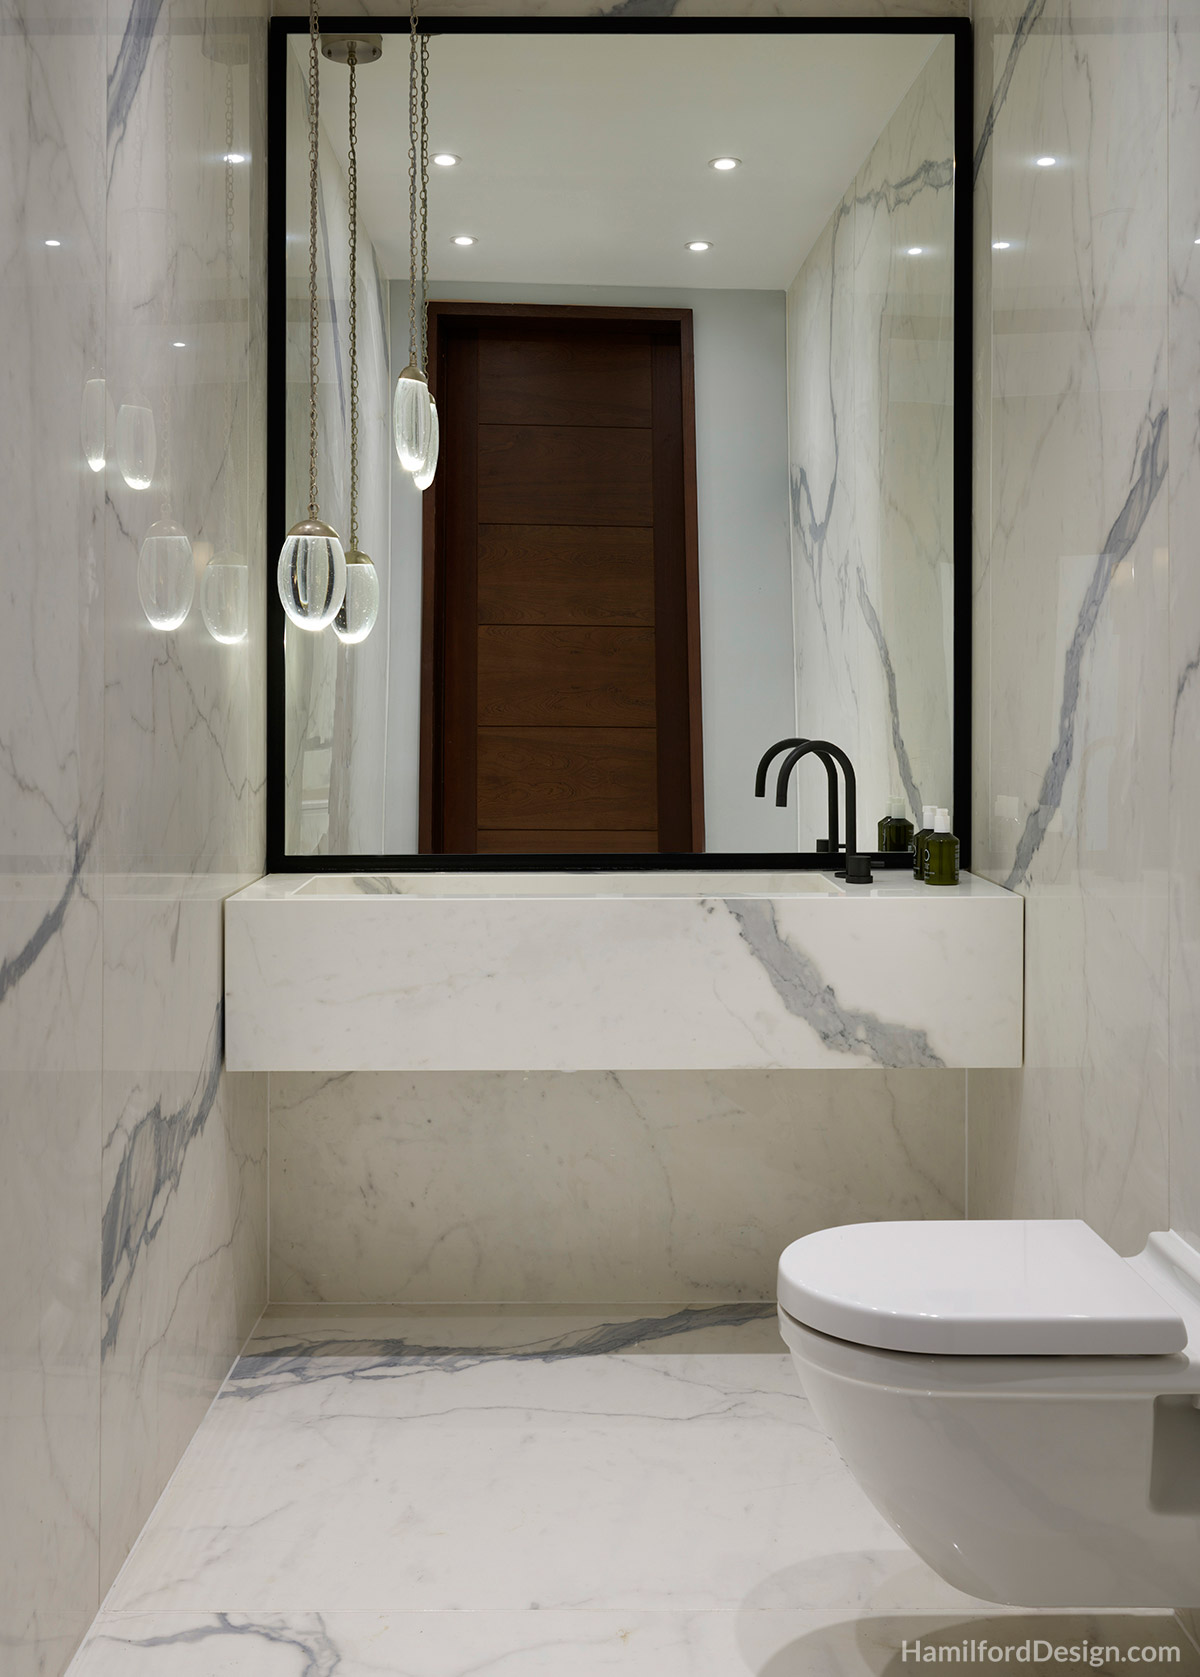 Bathroom - Cloakroom with White Marble